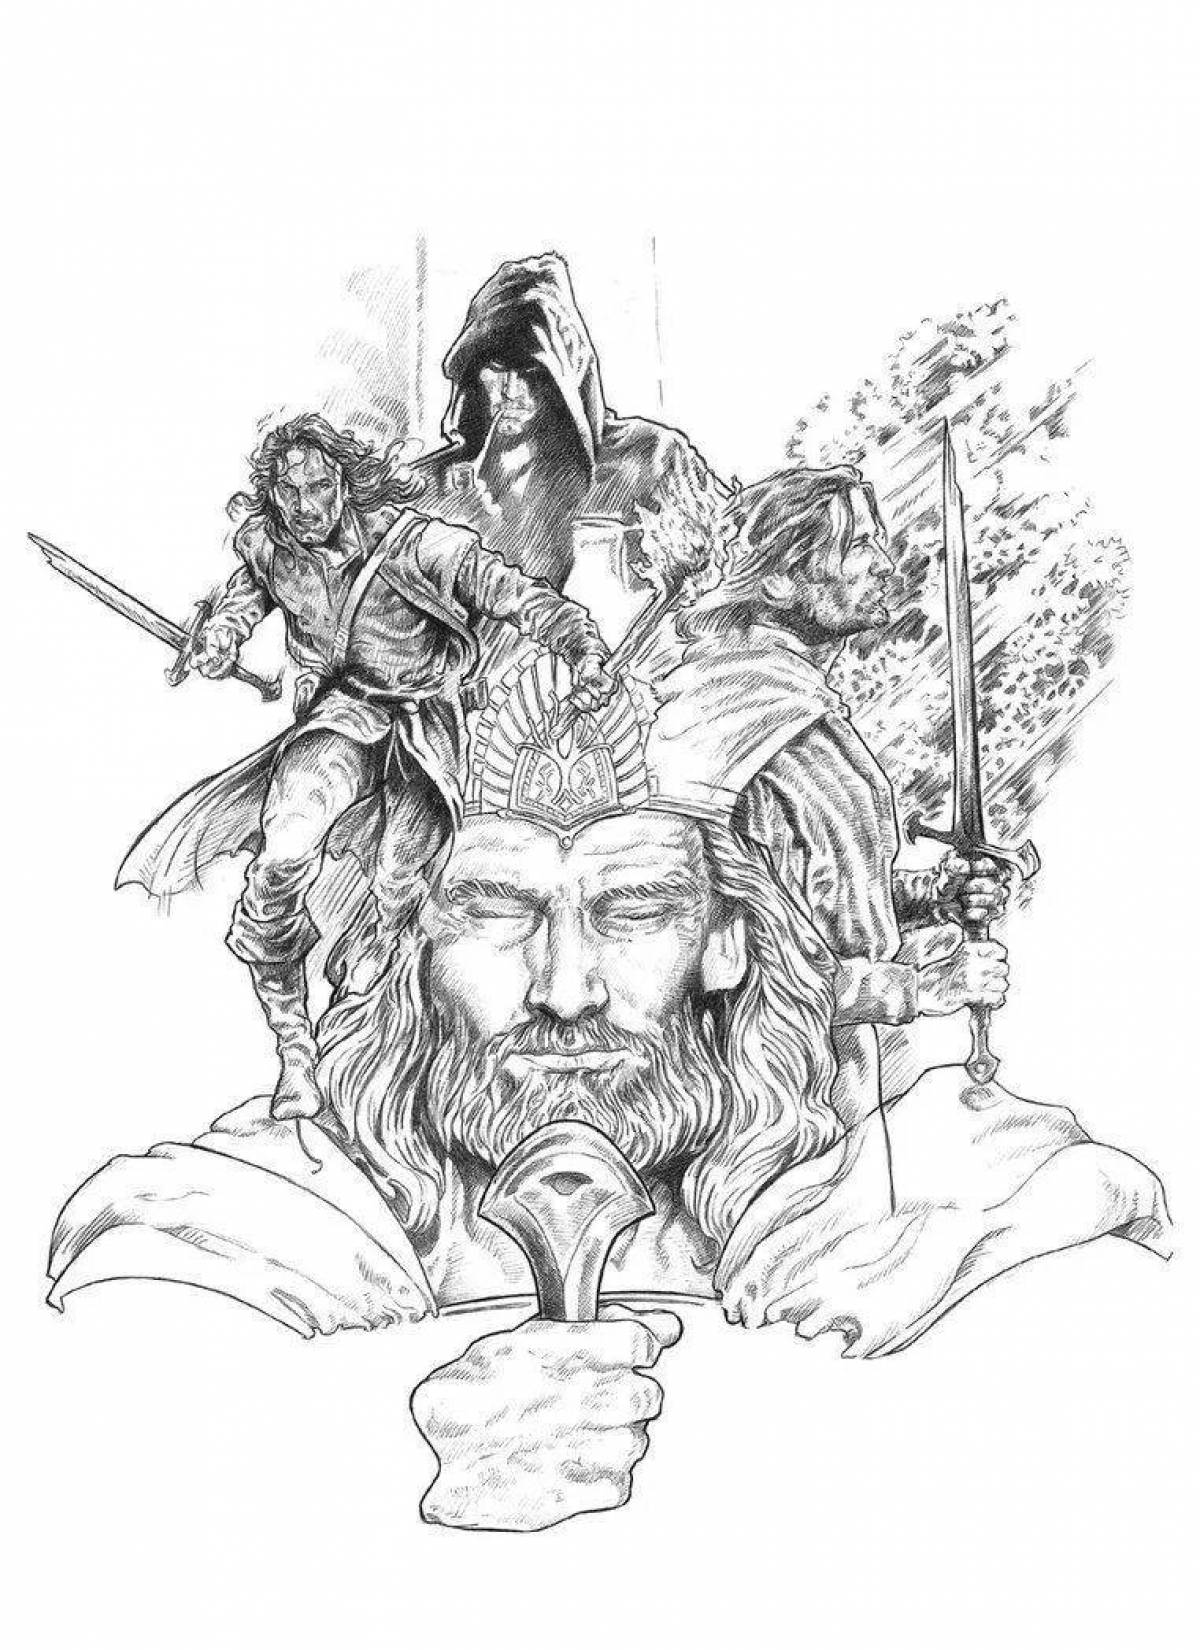 Tolkien's charming coloring book